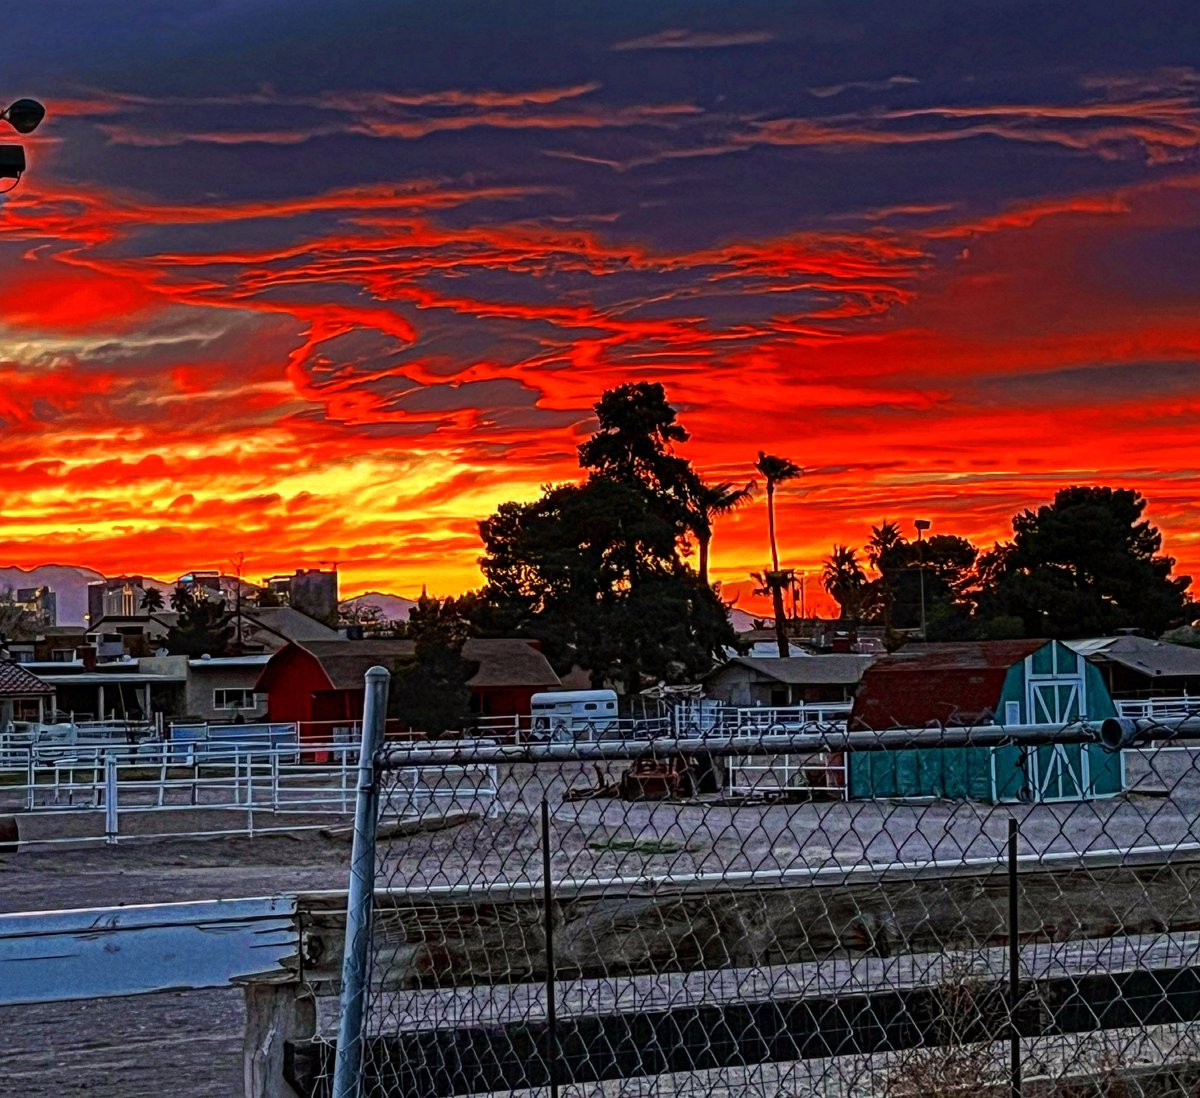 No one does sunsets like Las Vegas